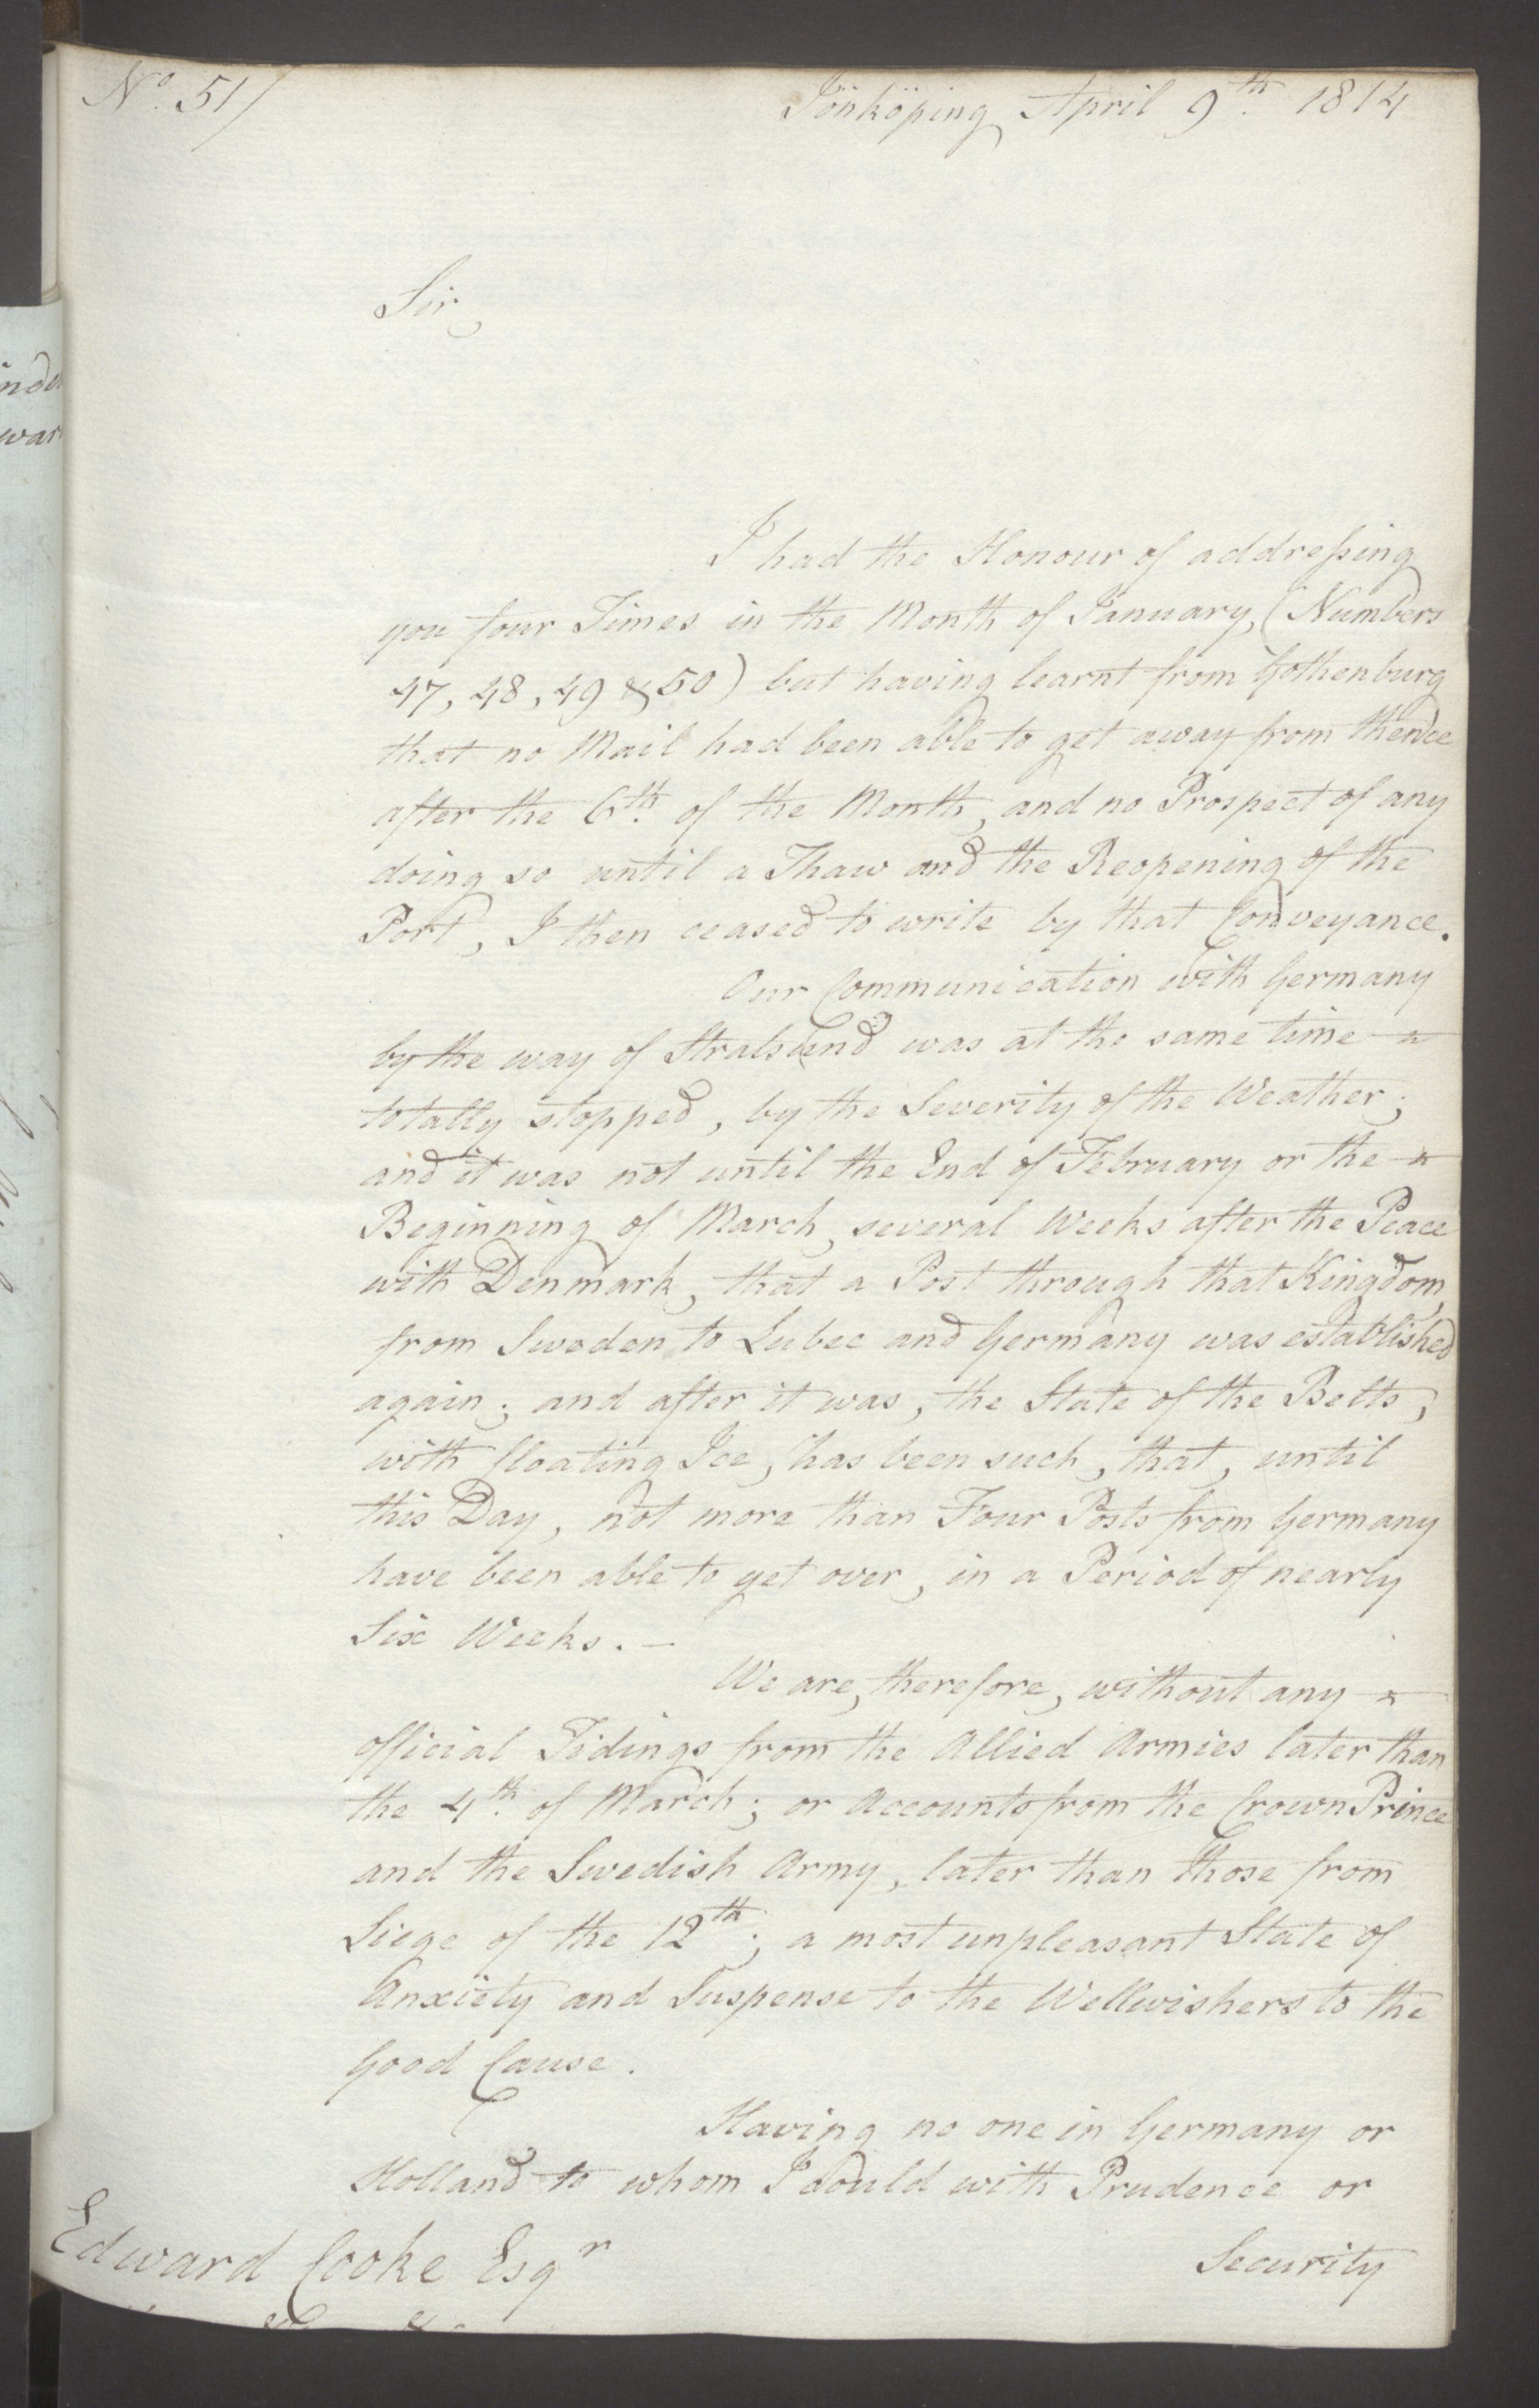 Foreign Office*, UKA/-/FO 38/16: Sir C. Gordon. Reports from Malmö, Jonkoping, and Helsingborg, 1814, p. 30